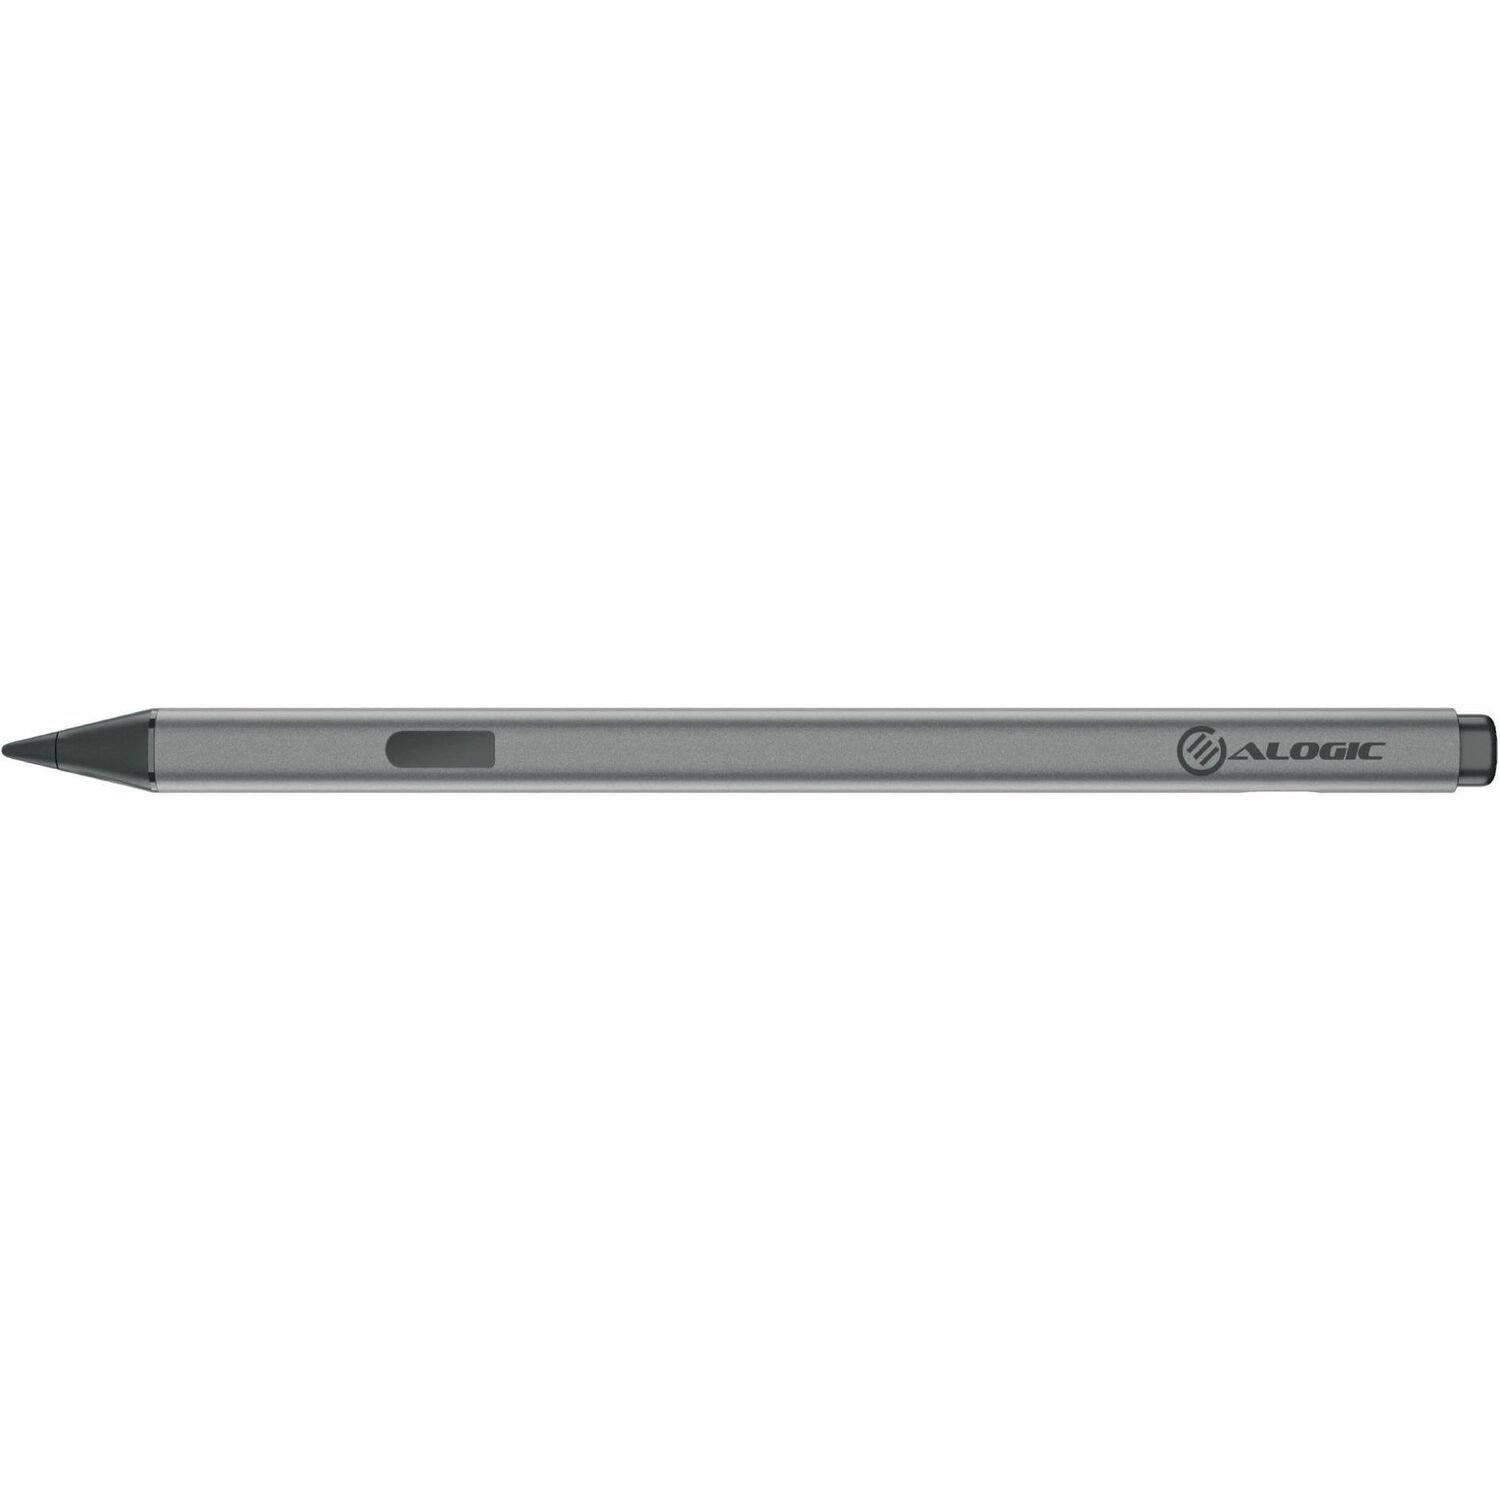 Alogic Stylus with Integrated Writing Pen - 1 Pack